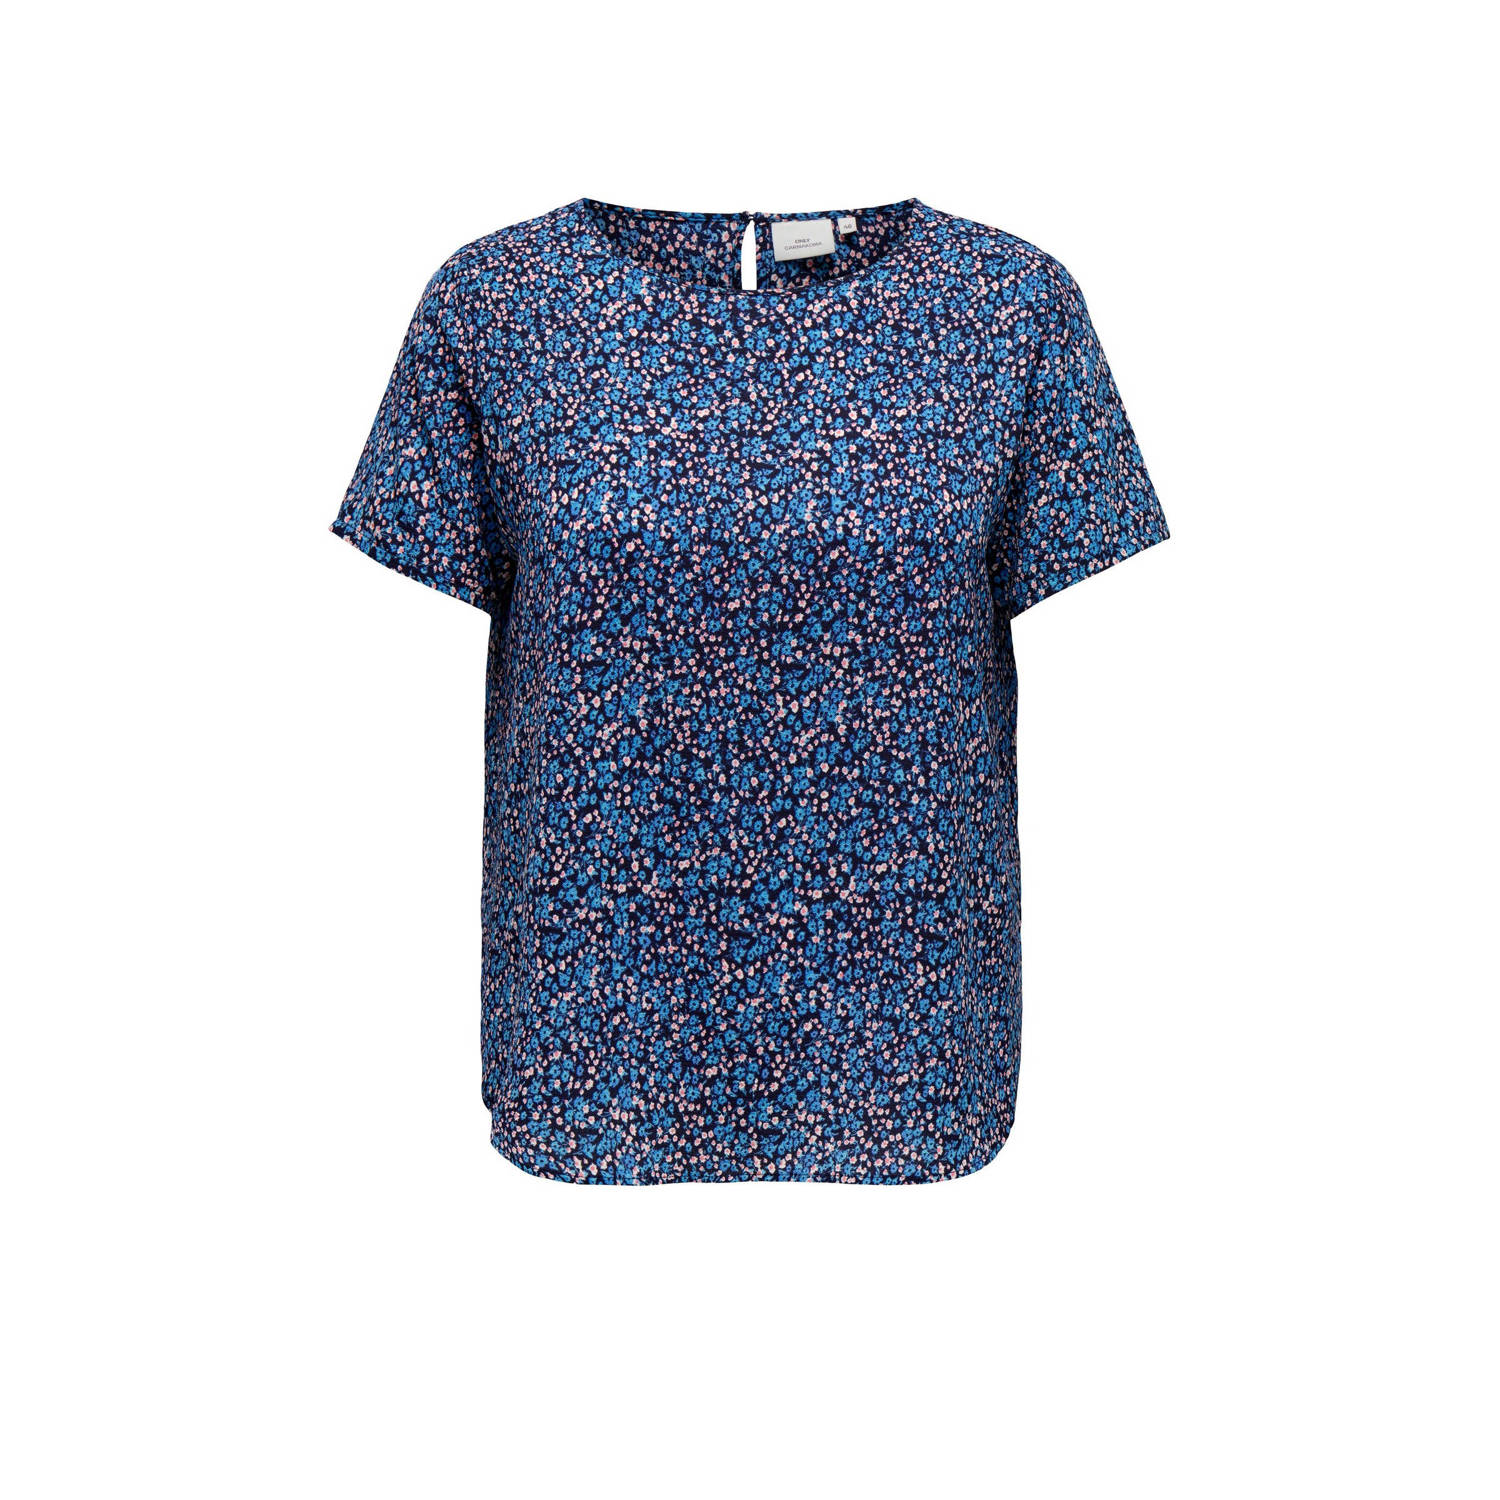 ONLY CARMAKOMA T-shirt CARVICA met all over print blauw zwart